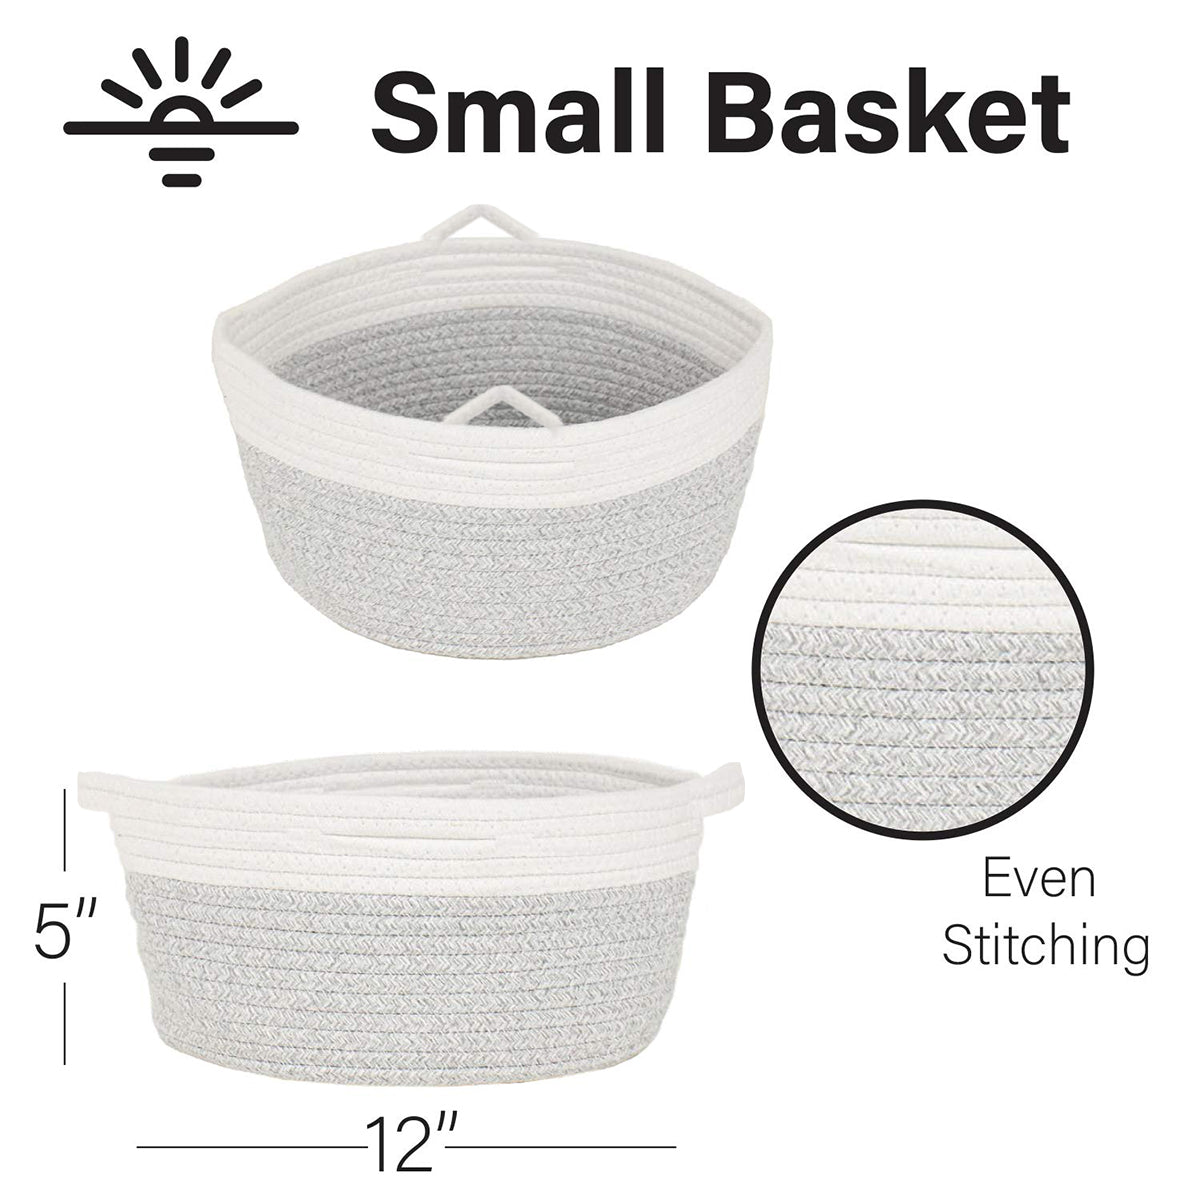 2pc Set Large Cotton Woven Baskets for Blankets, Clothing, Toys